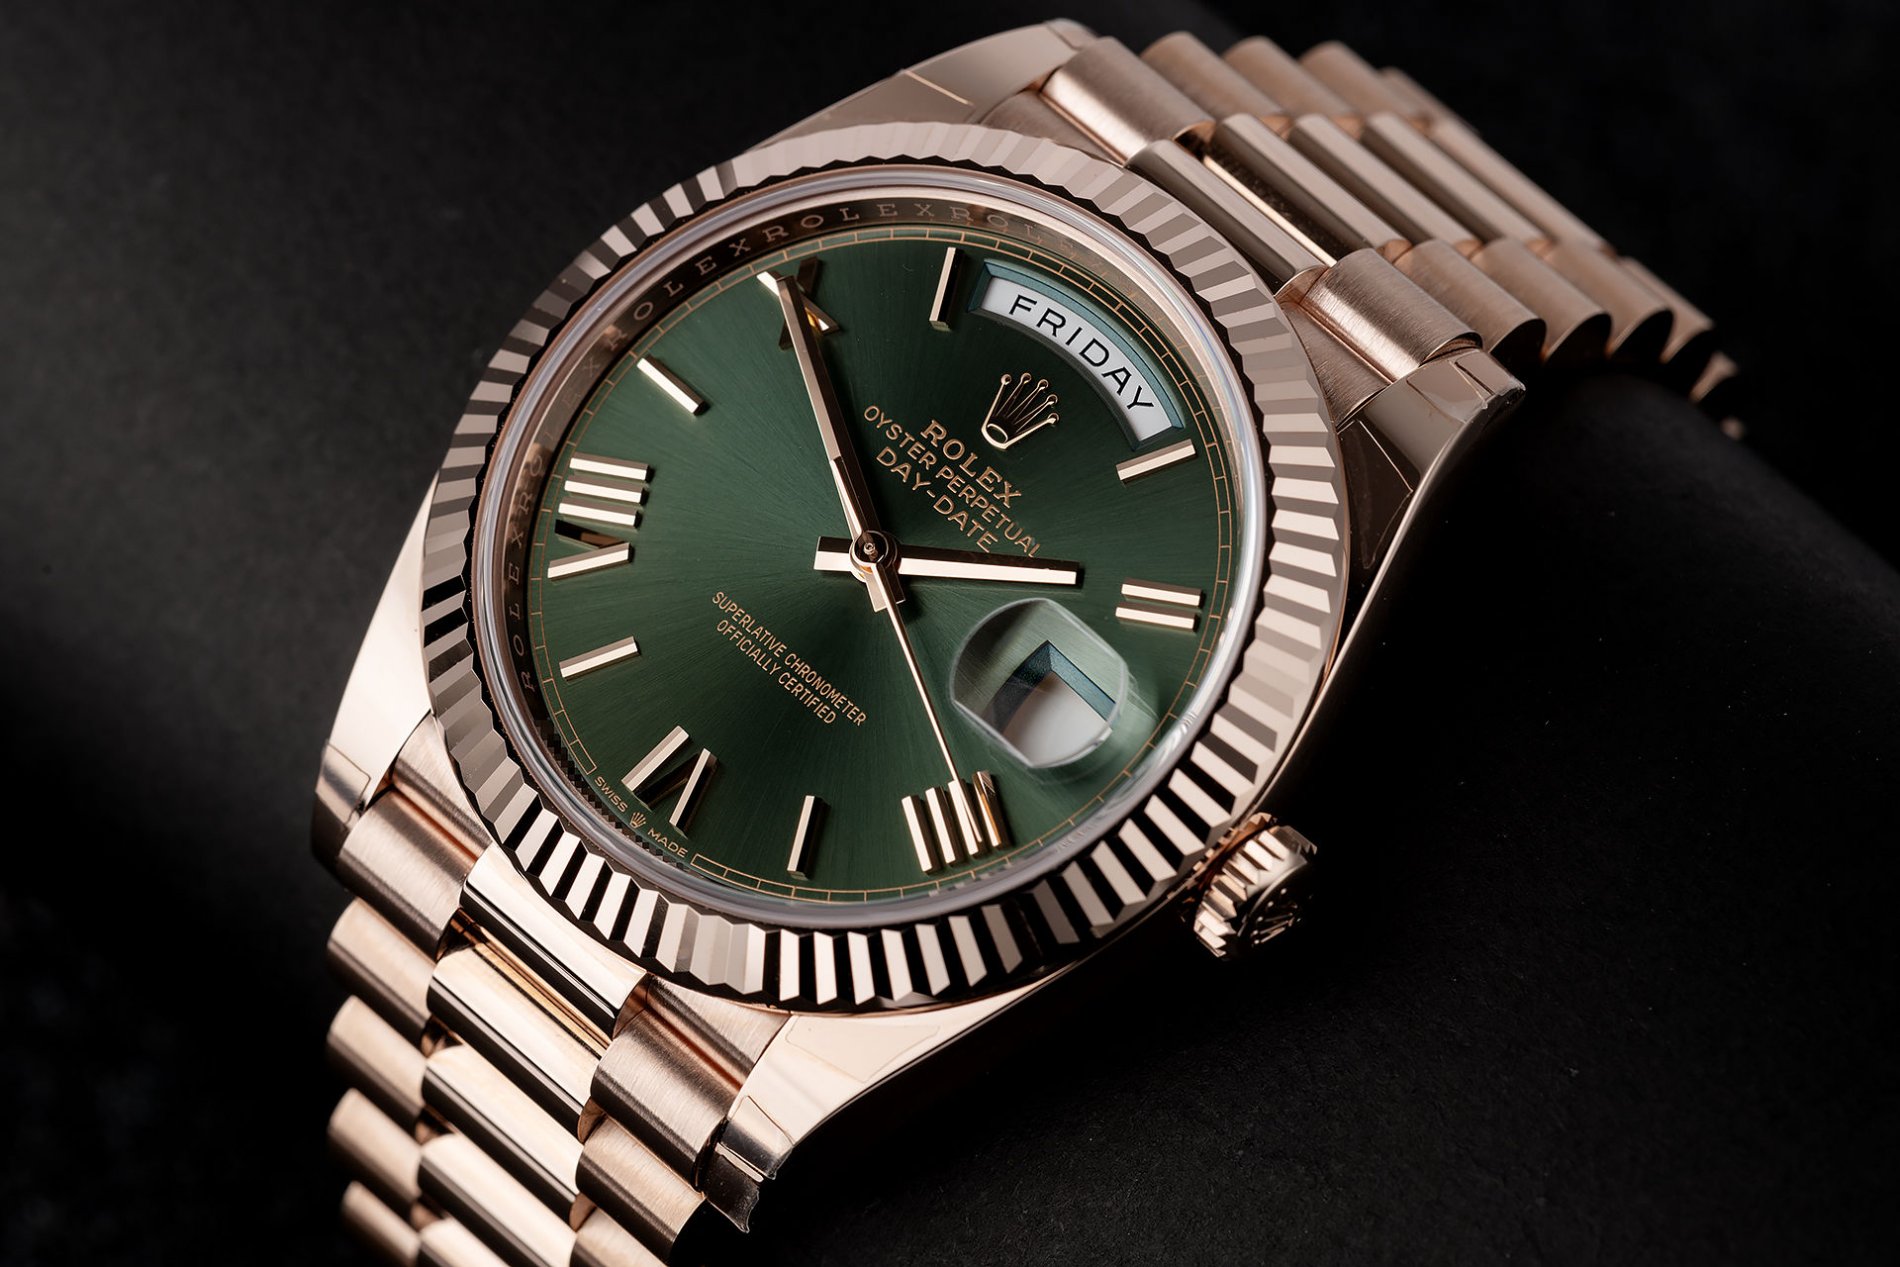 cai-can-0901000001-rolex-day-date-rolex-warranty-to-2024-ref-228235-year-2019-13879-2.jpeg